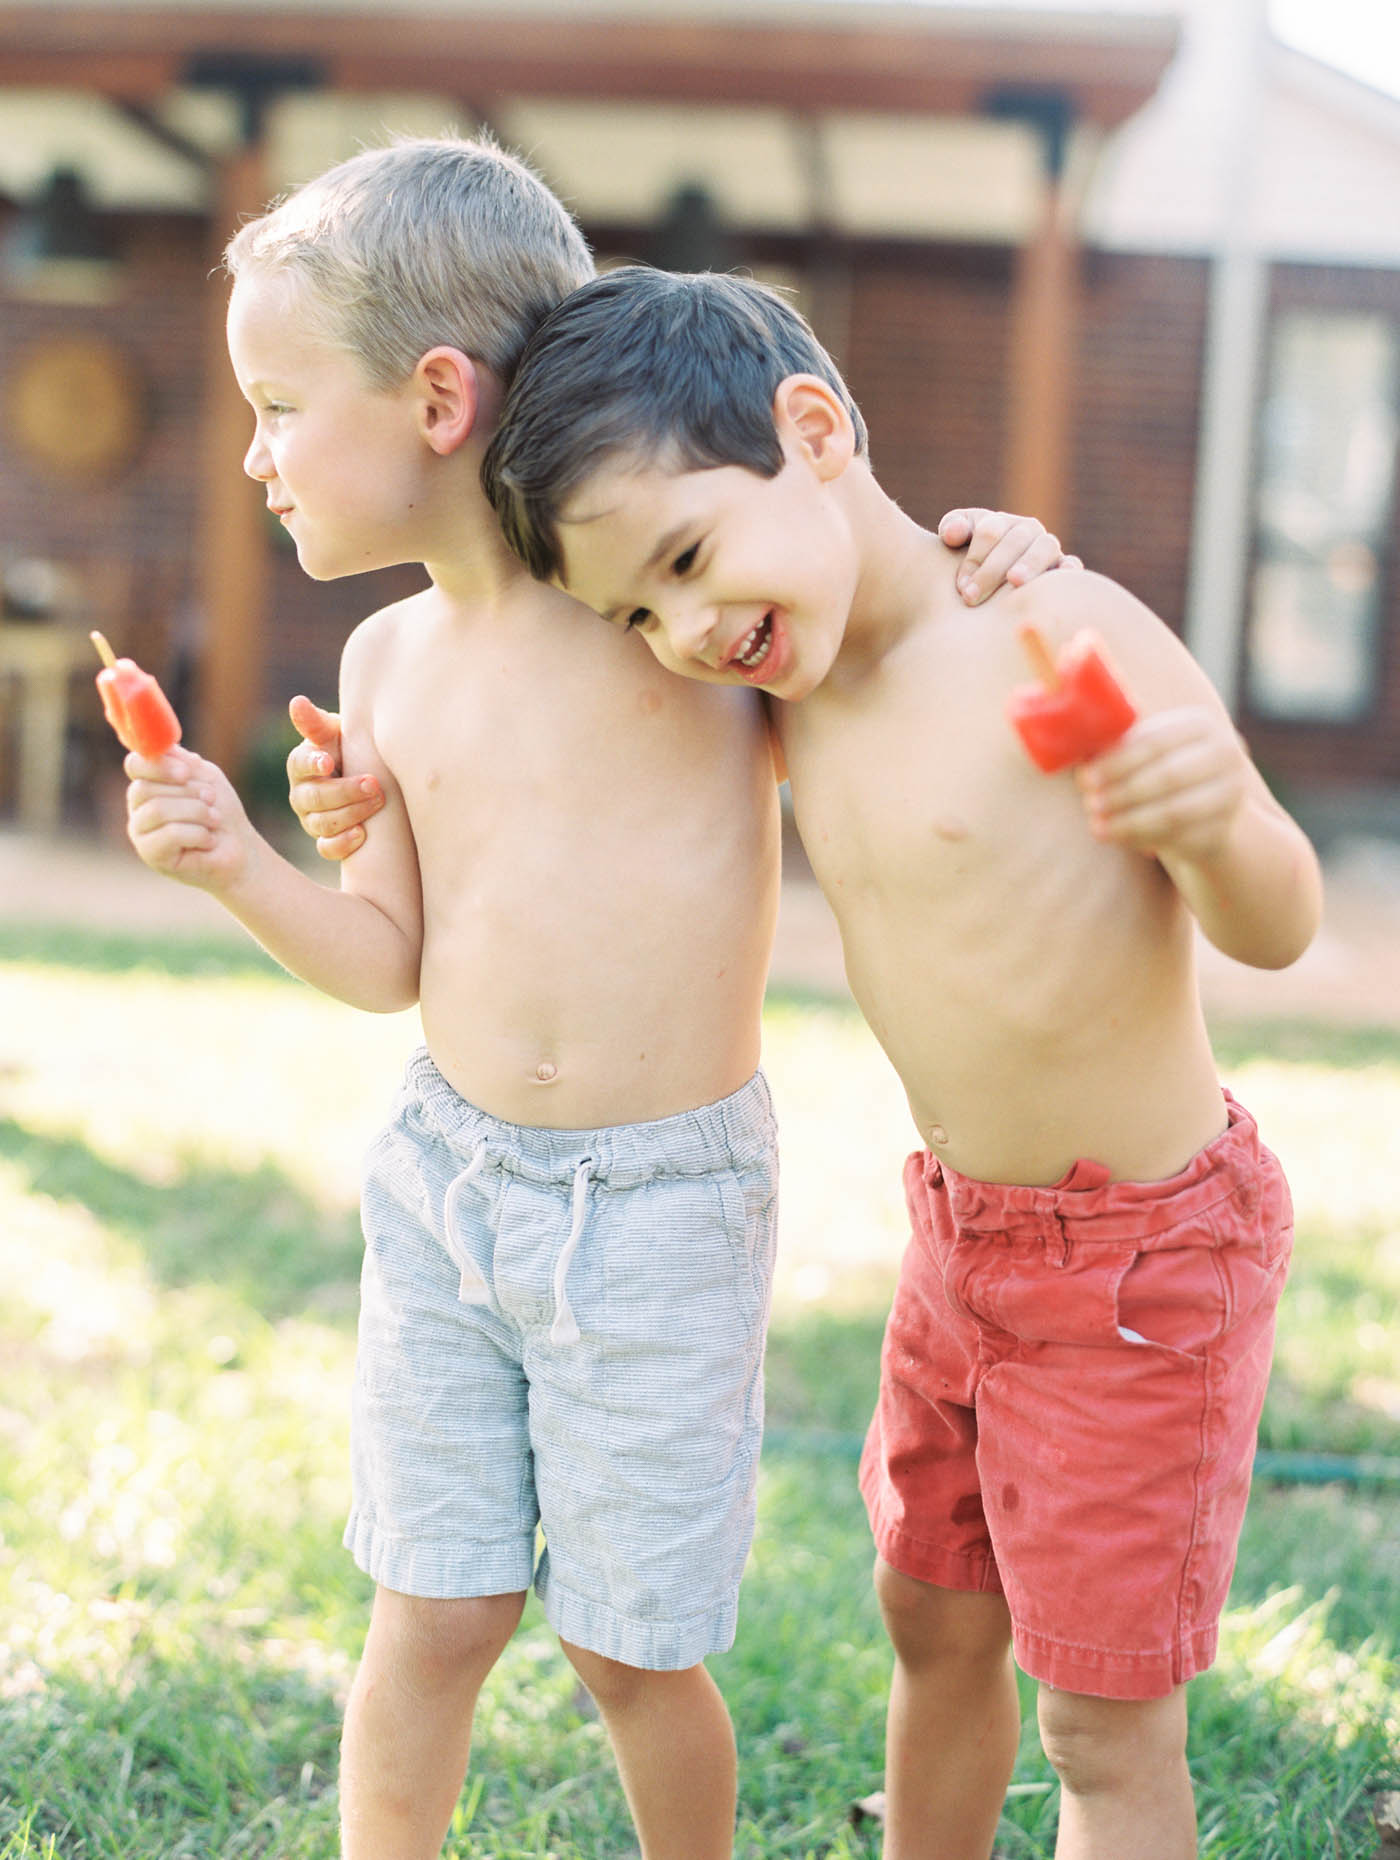 Two young boys eating organic popsicles in a backyard summertime setting 